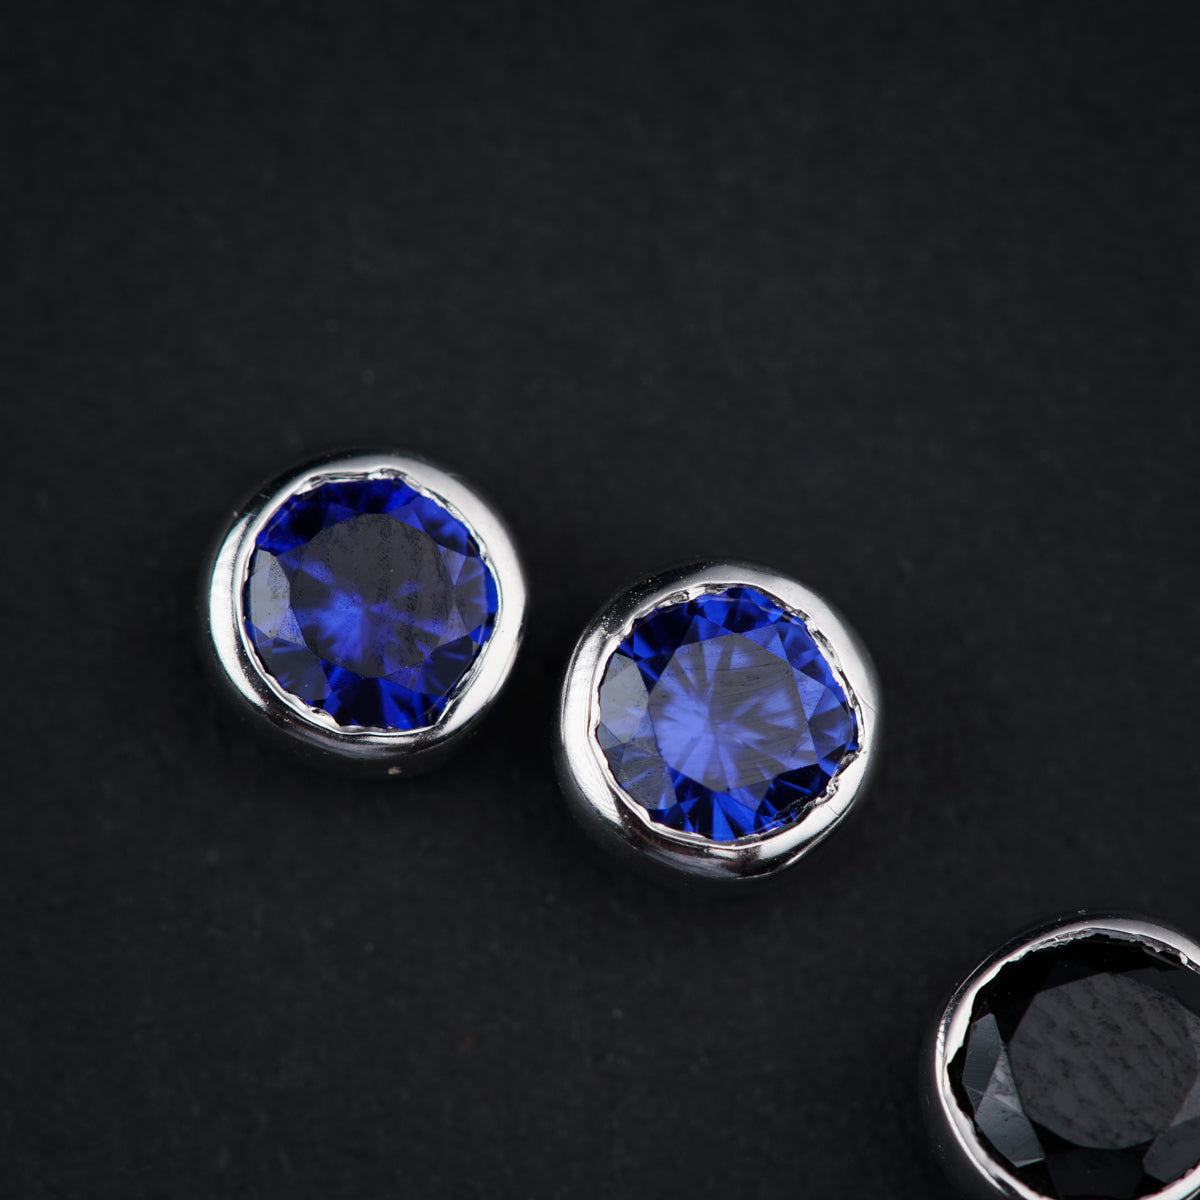 a pair of blue and black diamond earrings